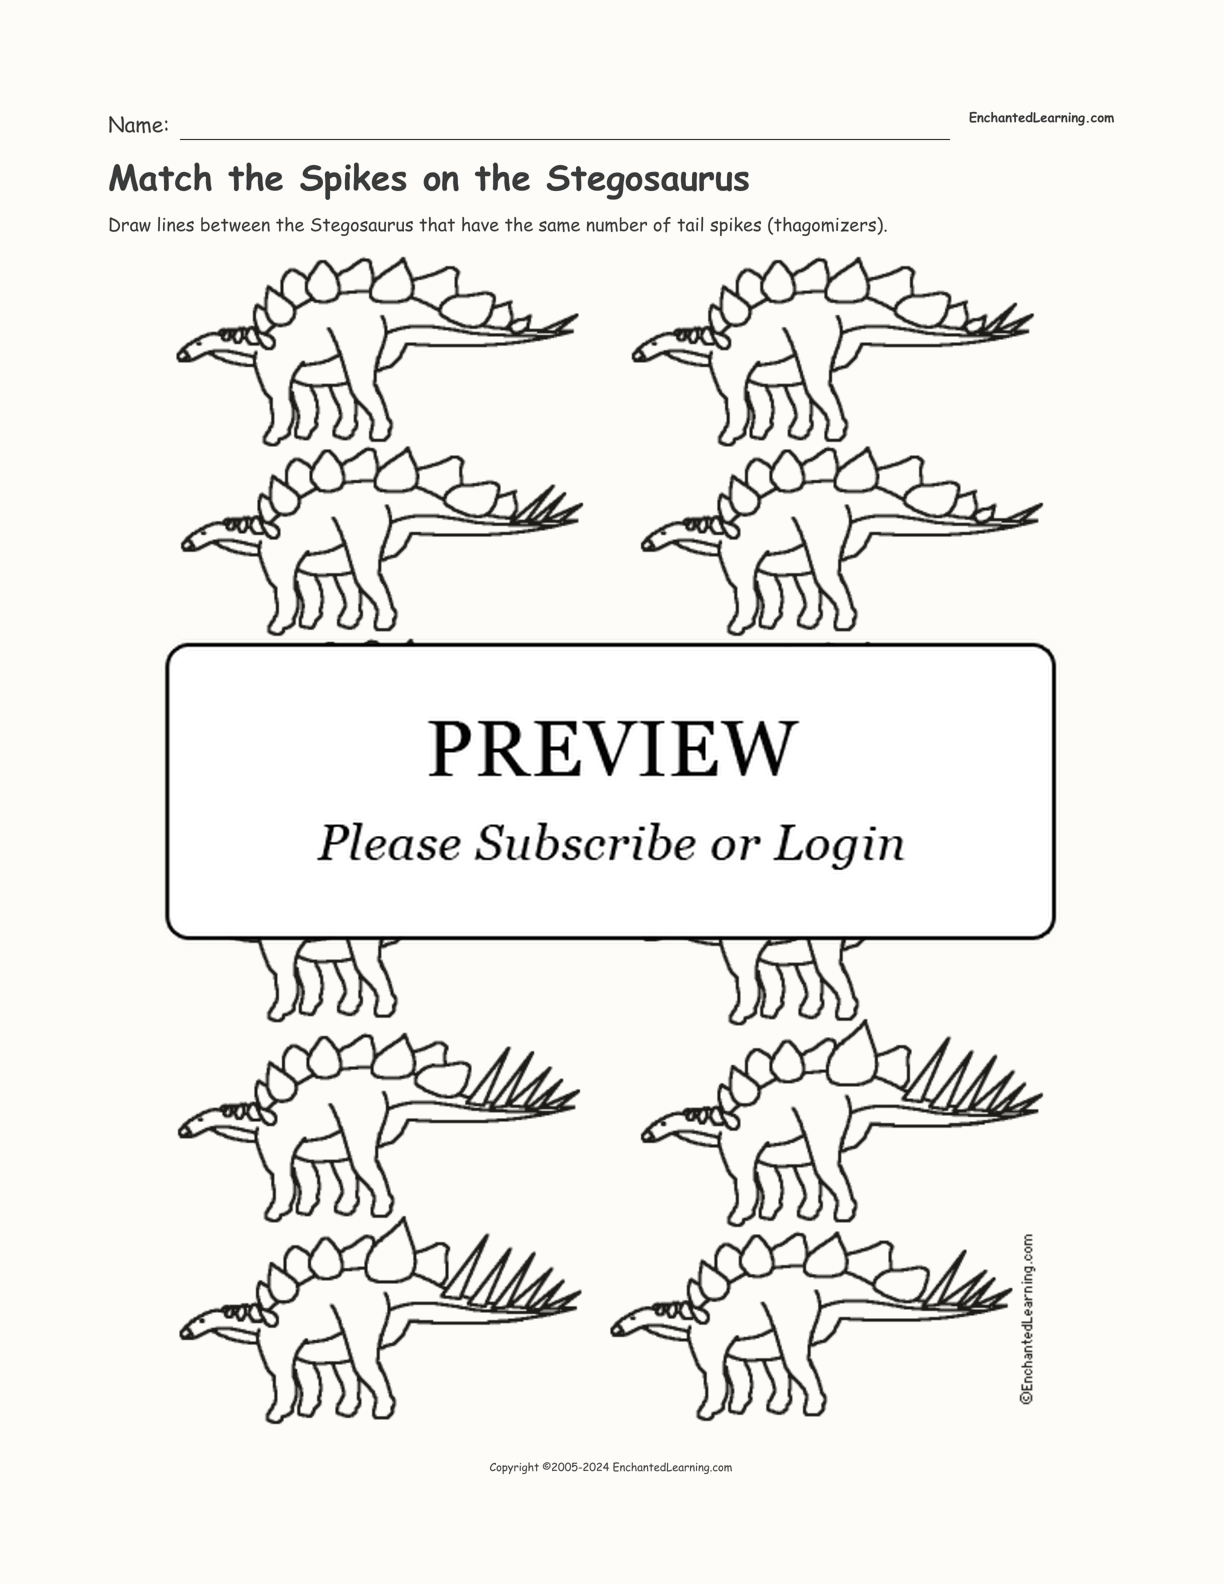 Match the Spikes on the Stegosaurus interactive worksheet page 1